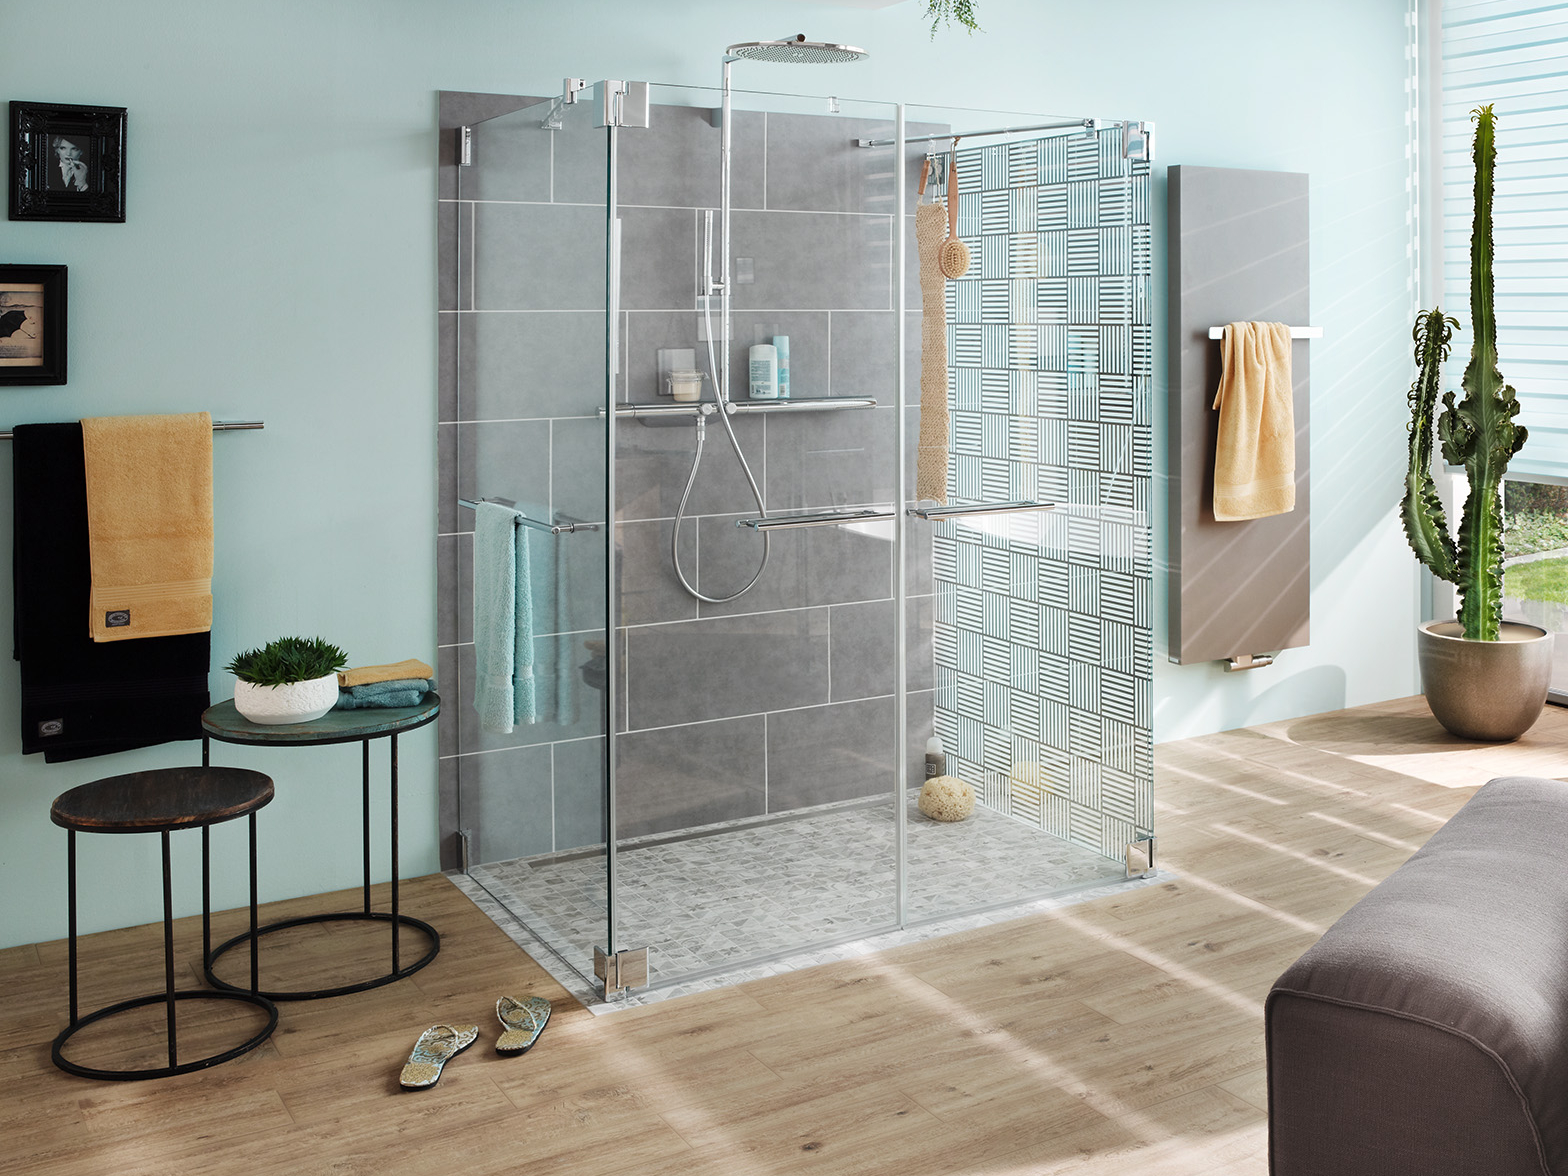 Kermi shower board LINE with channel cover along wall